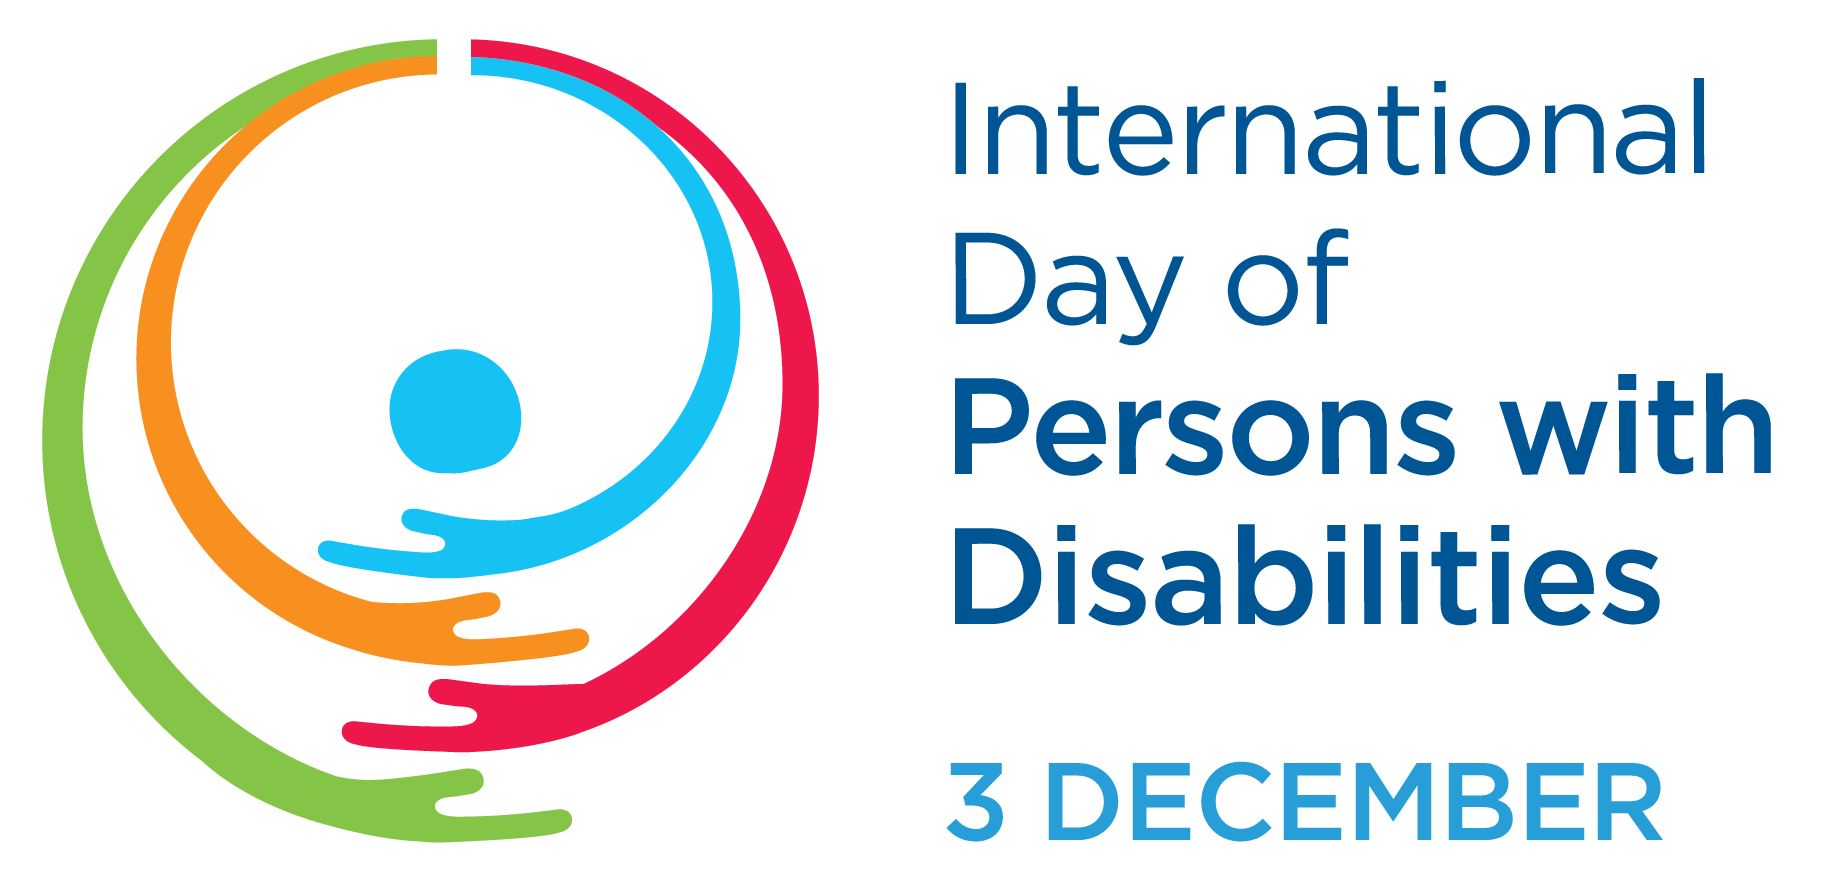 International Day of Persons with Disabilities 3 December United Nations Enable